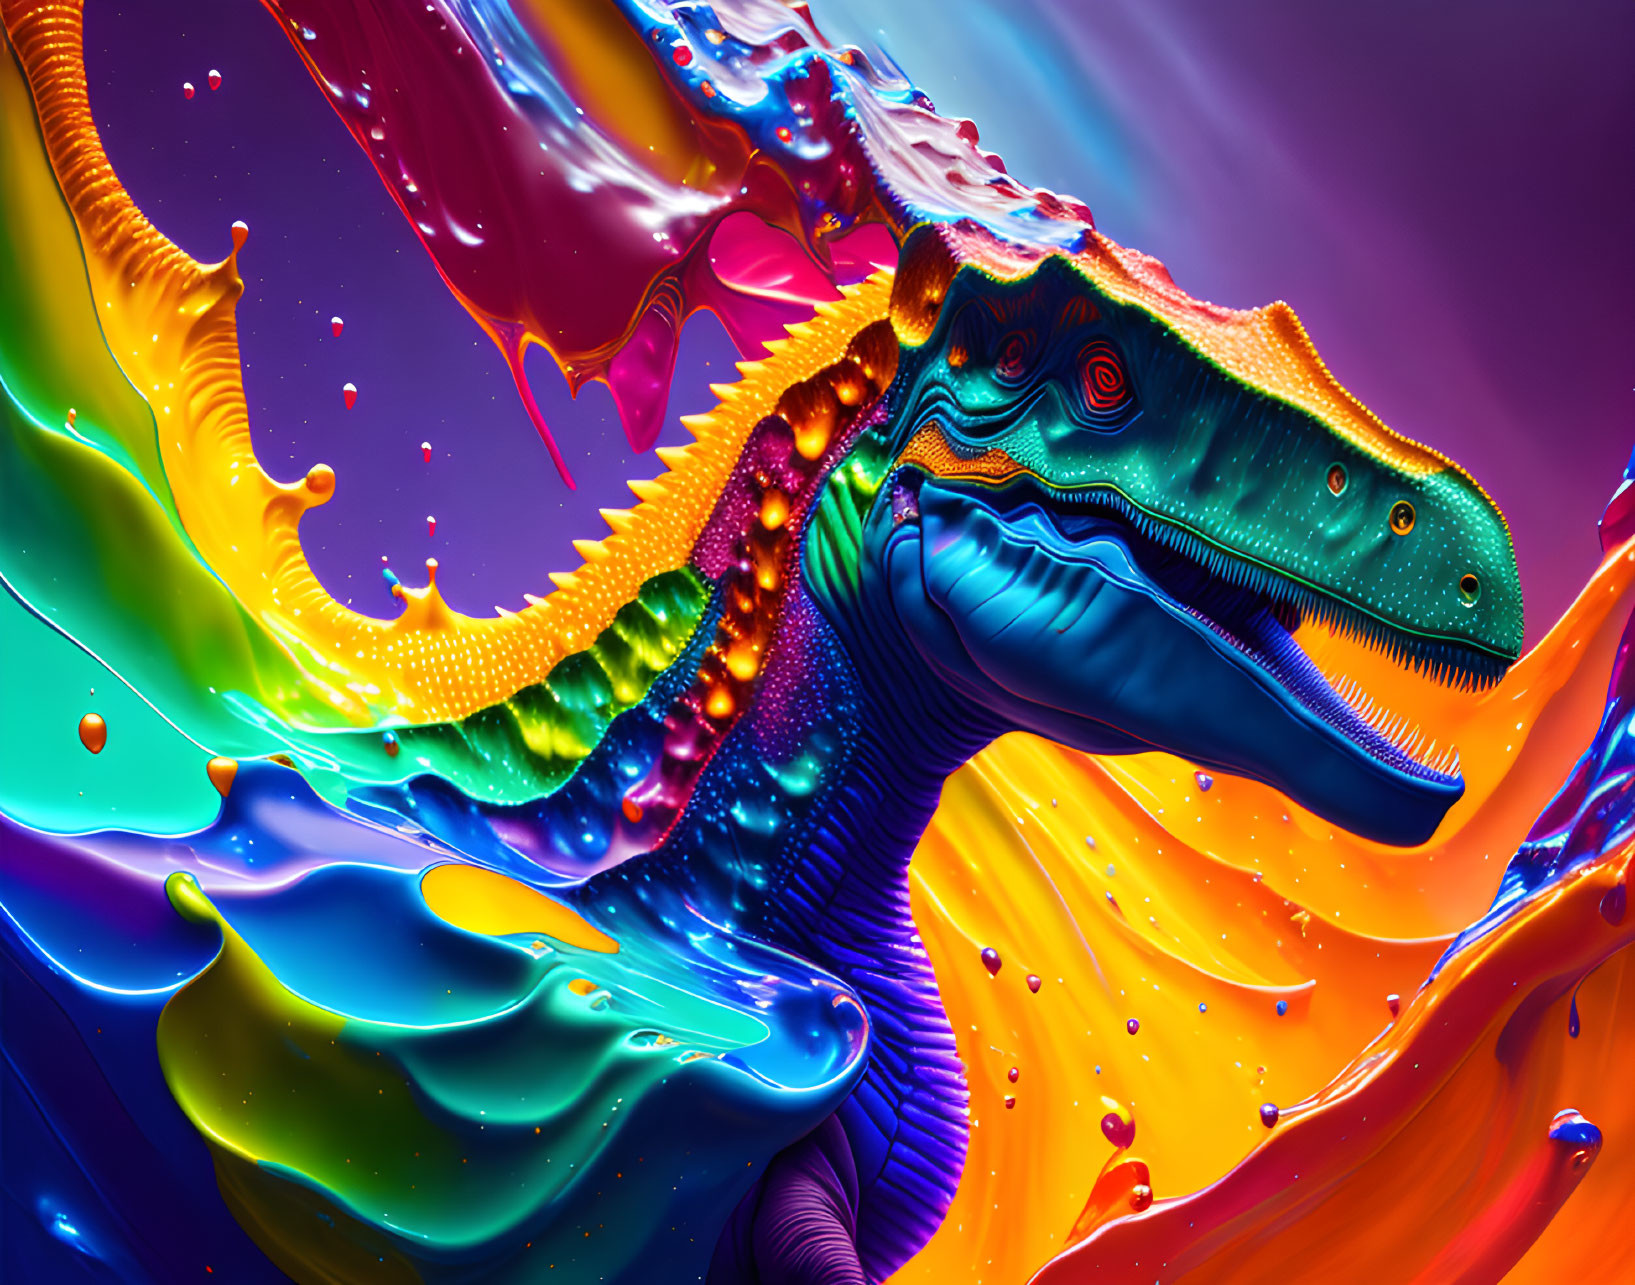 Colorful digital artwork: Dinosaur with liquid texture and abstract shapes